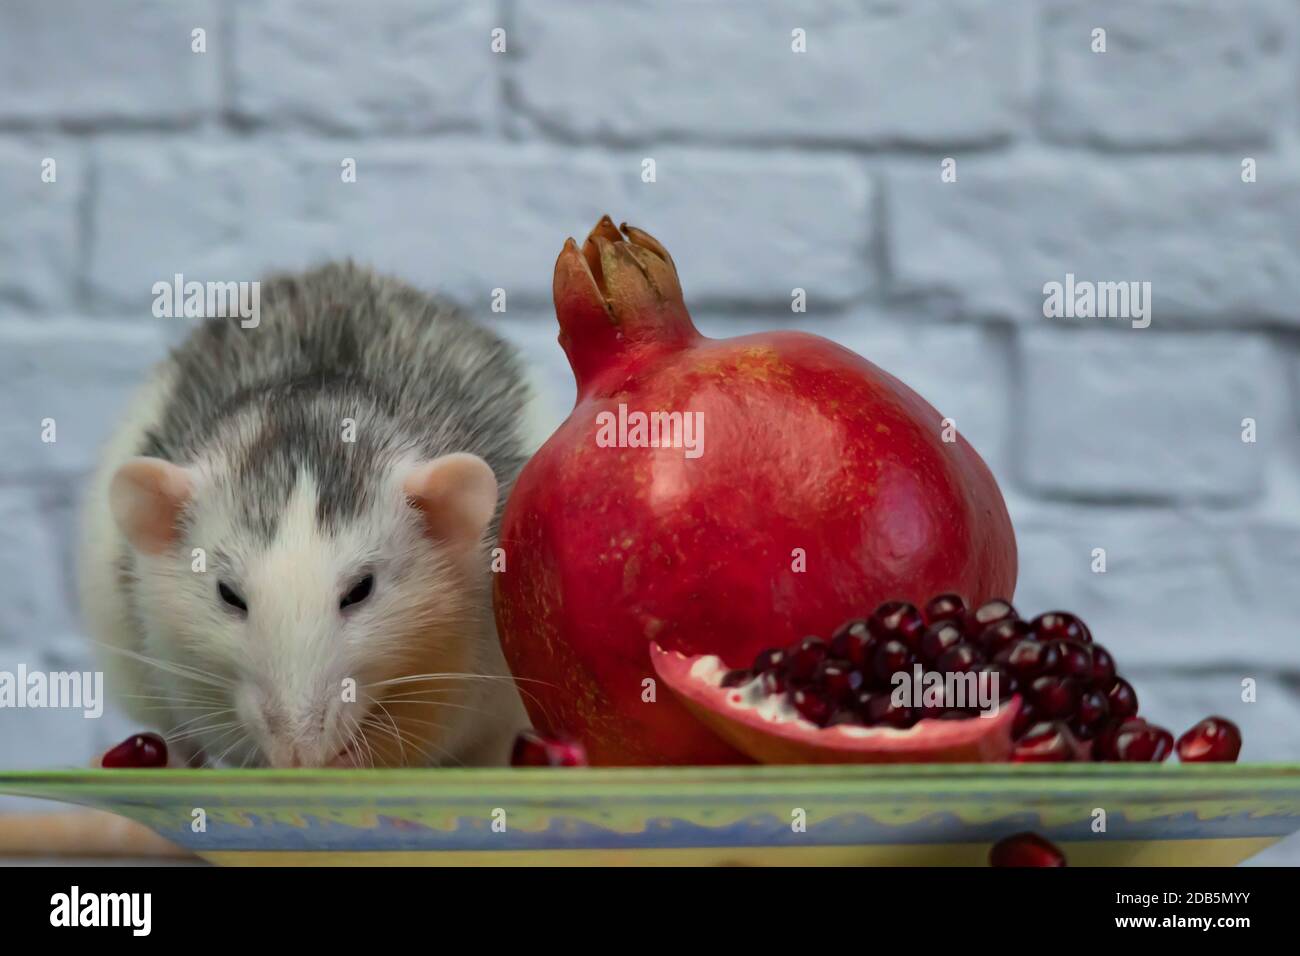 A cute decorative black and white rat sits and eats a ripe, juicy red pomegranate fruit. Close-up of a rodent on a yellow plate Stock Photo